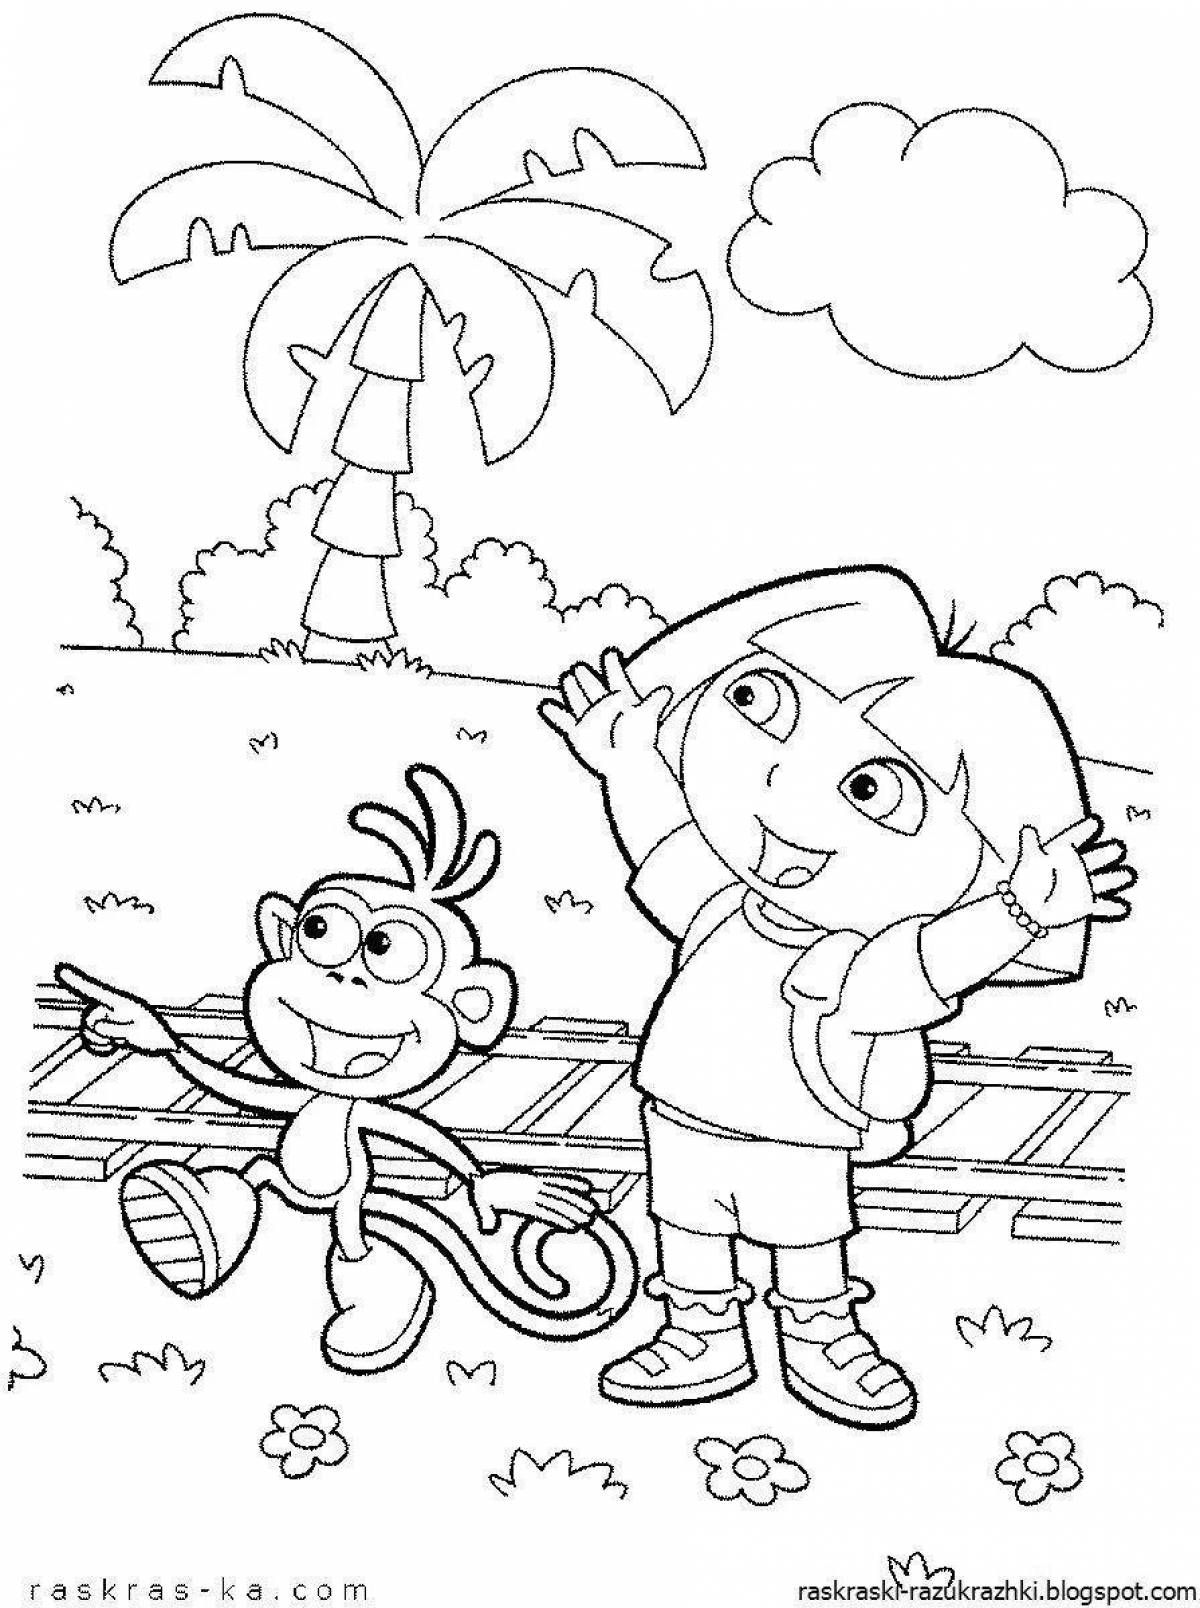 Colour-entertaining coloring book for children 4-5 years old from cartoons